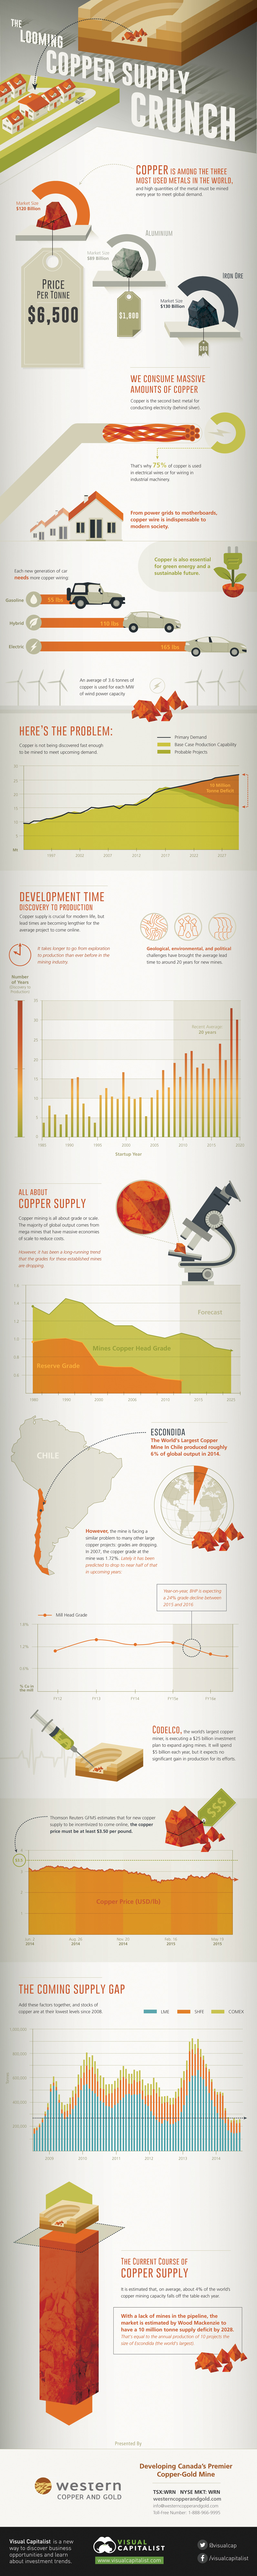 The Looming Copper Supply Crunch